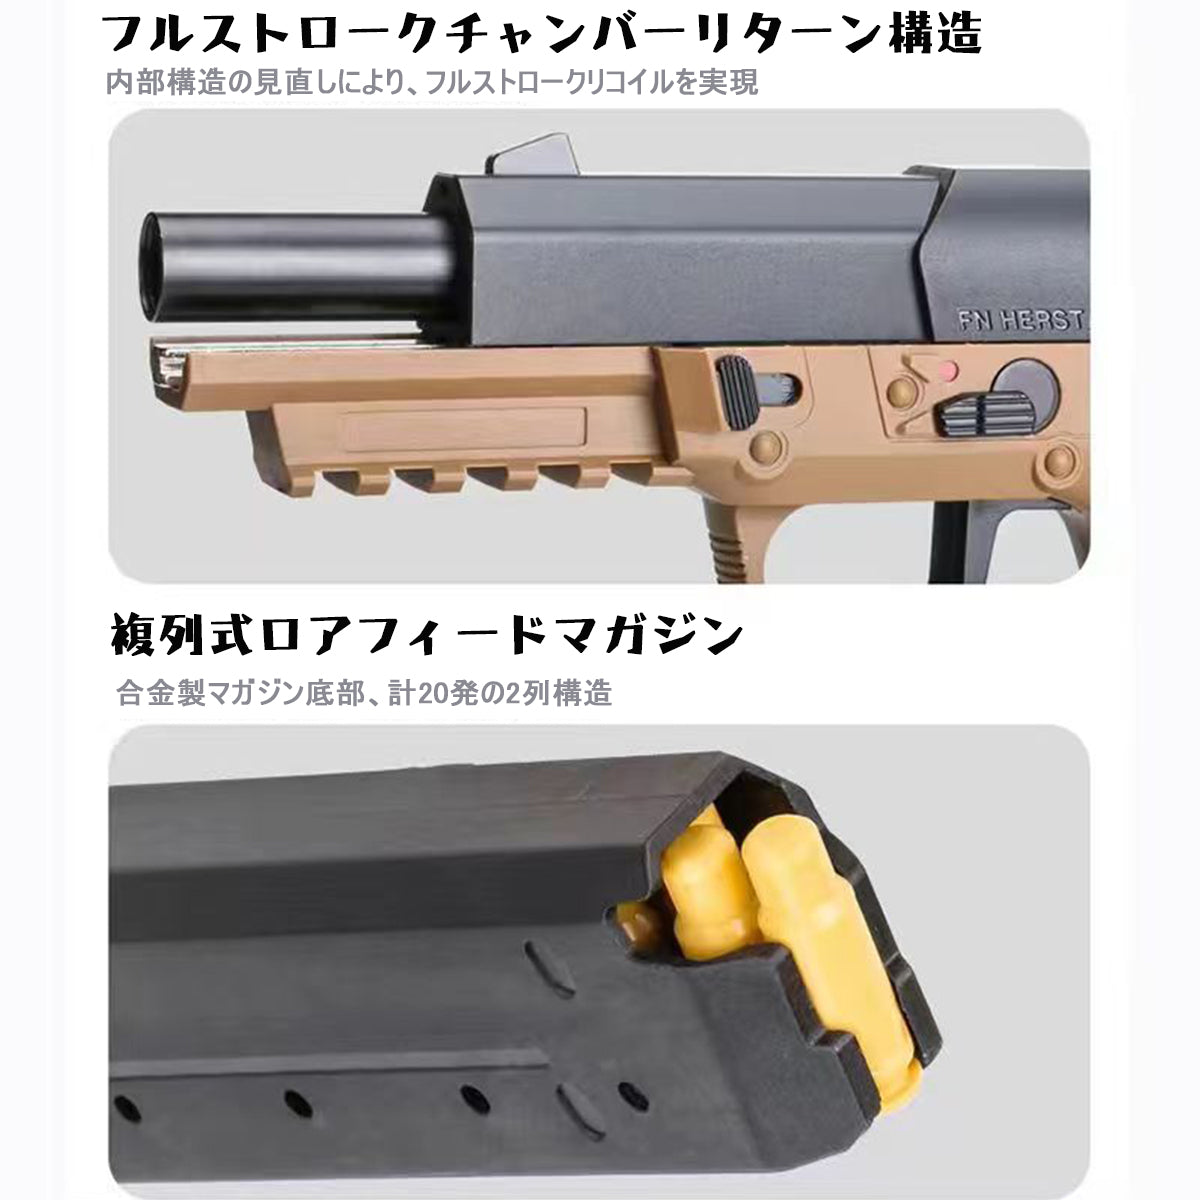 FN57 made by M (MoliFang) New structure shell ejection type finger action blowback real cart laser gun continuous firing double column wave mounted laser head hand gun style toy gun 